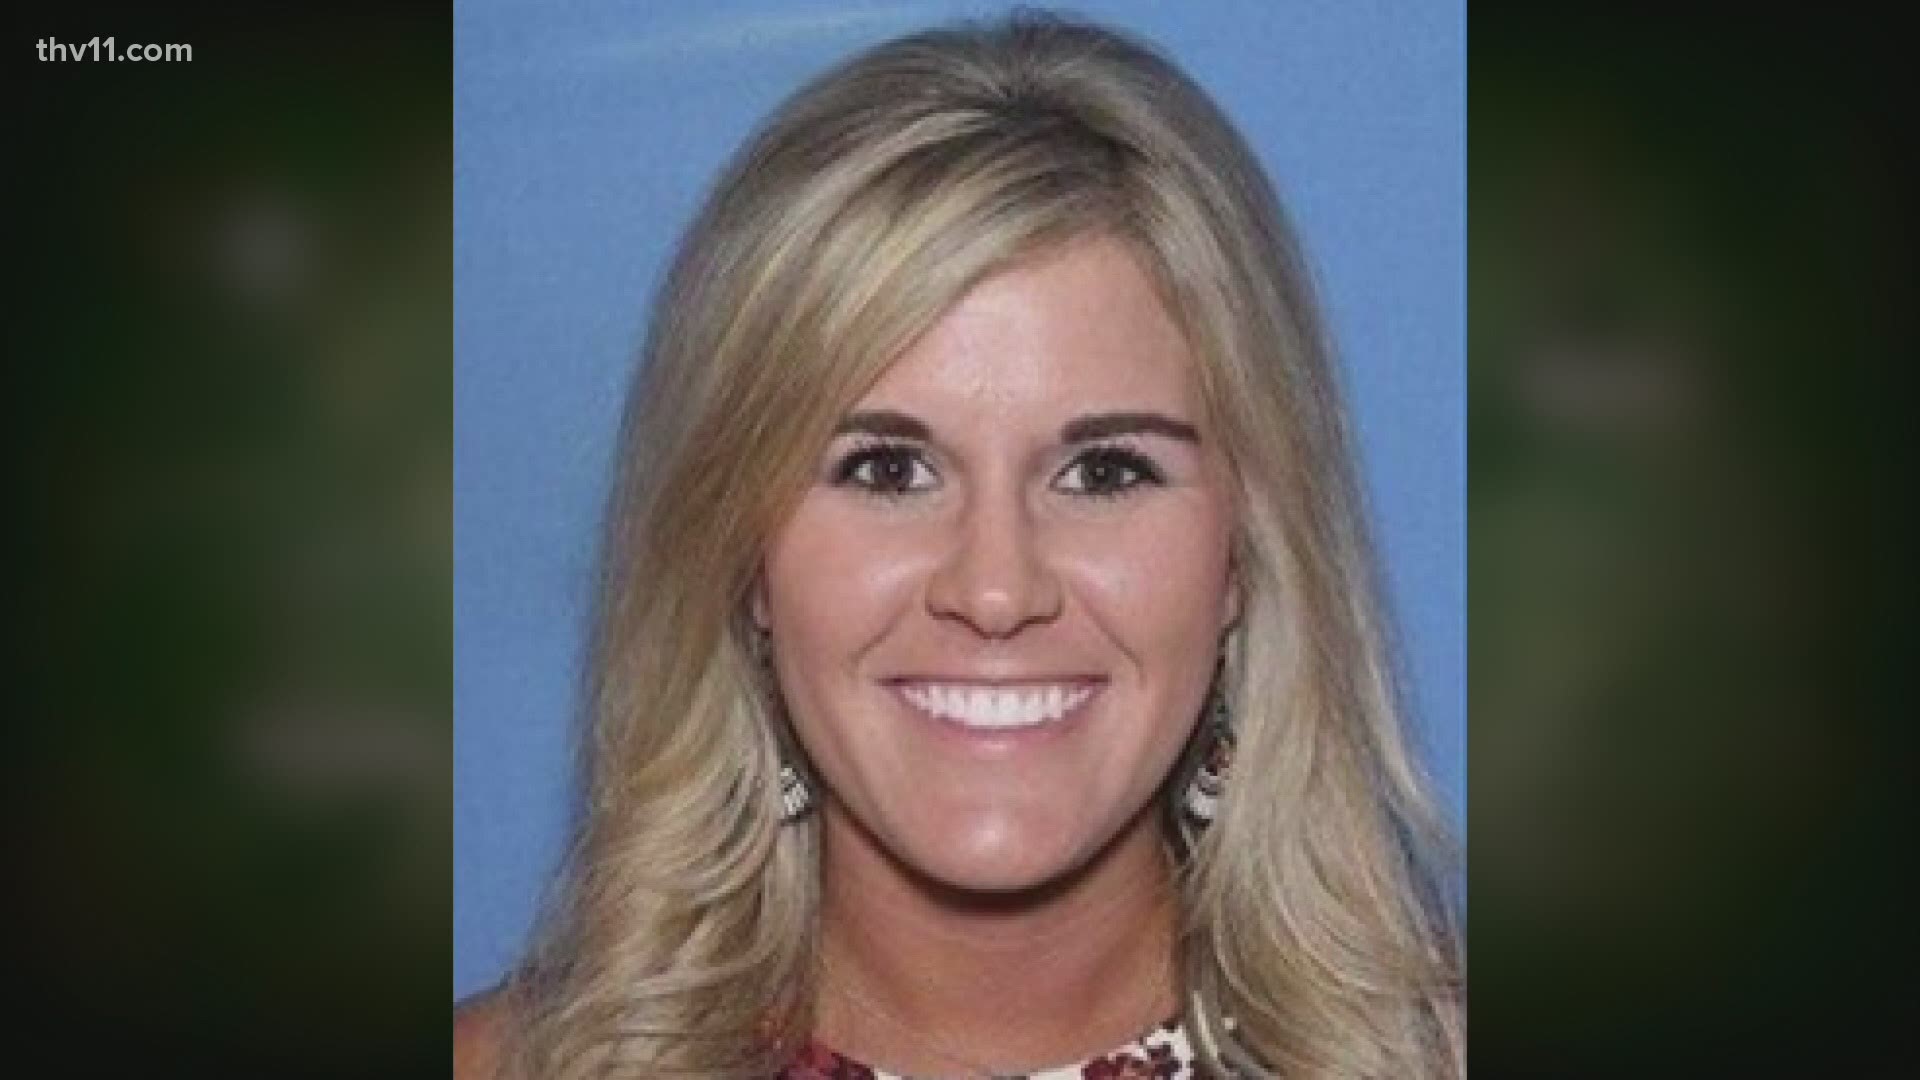 The Arkansas State Examiner has confirmed the death of Sydney Sutherland.